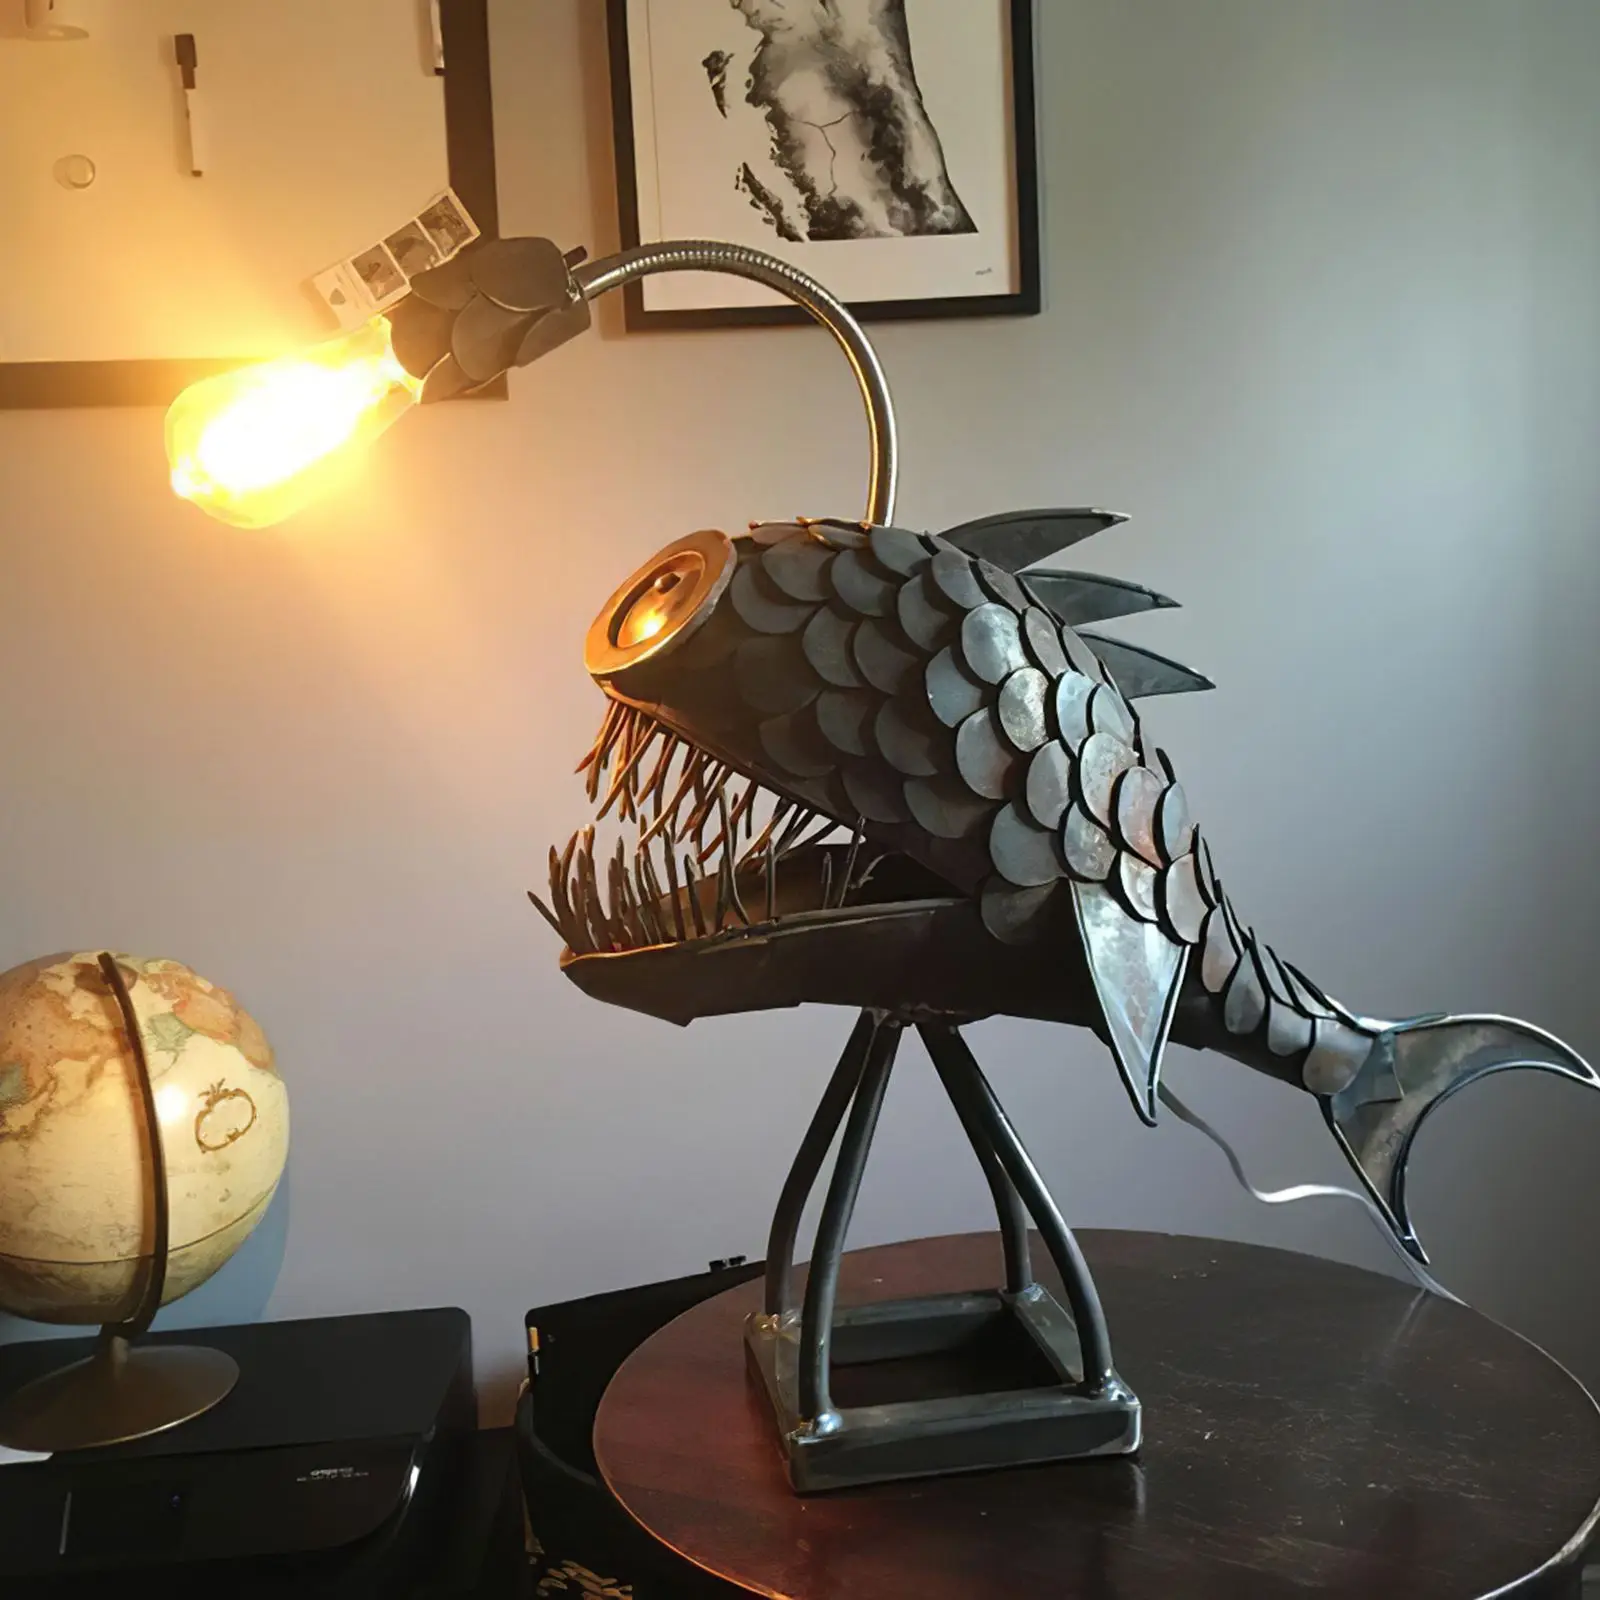 

Angler Fish Lamp Floor-standing Retro Art Table Lamp with USB Interface Table Lamps LED Light for Bedroom Living Room Office Bar